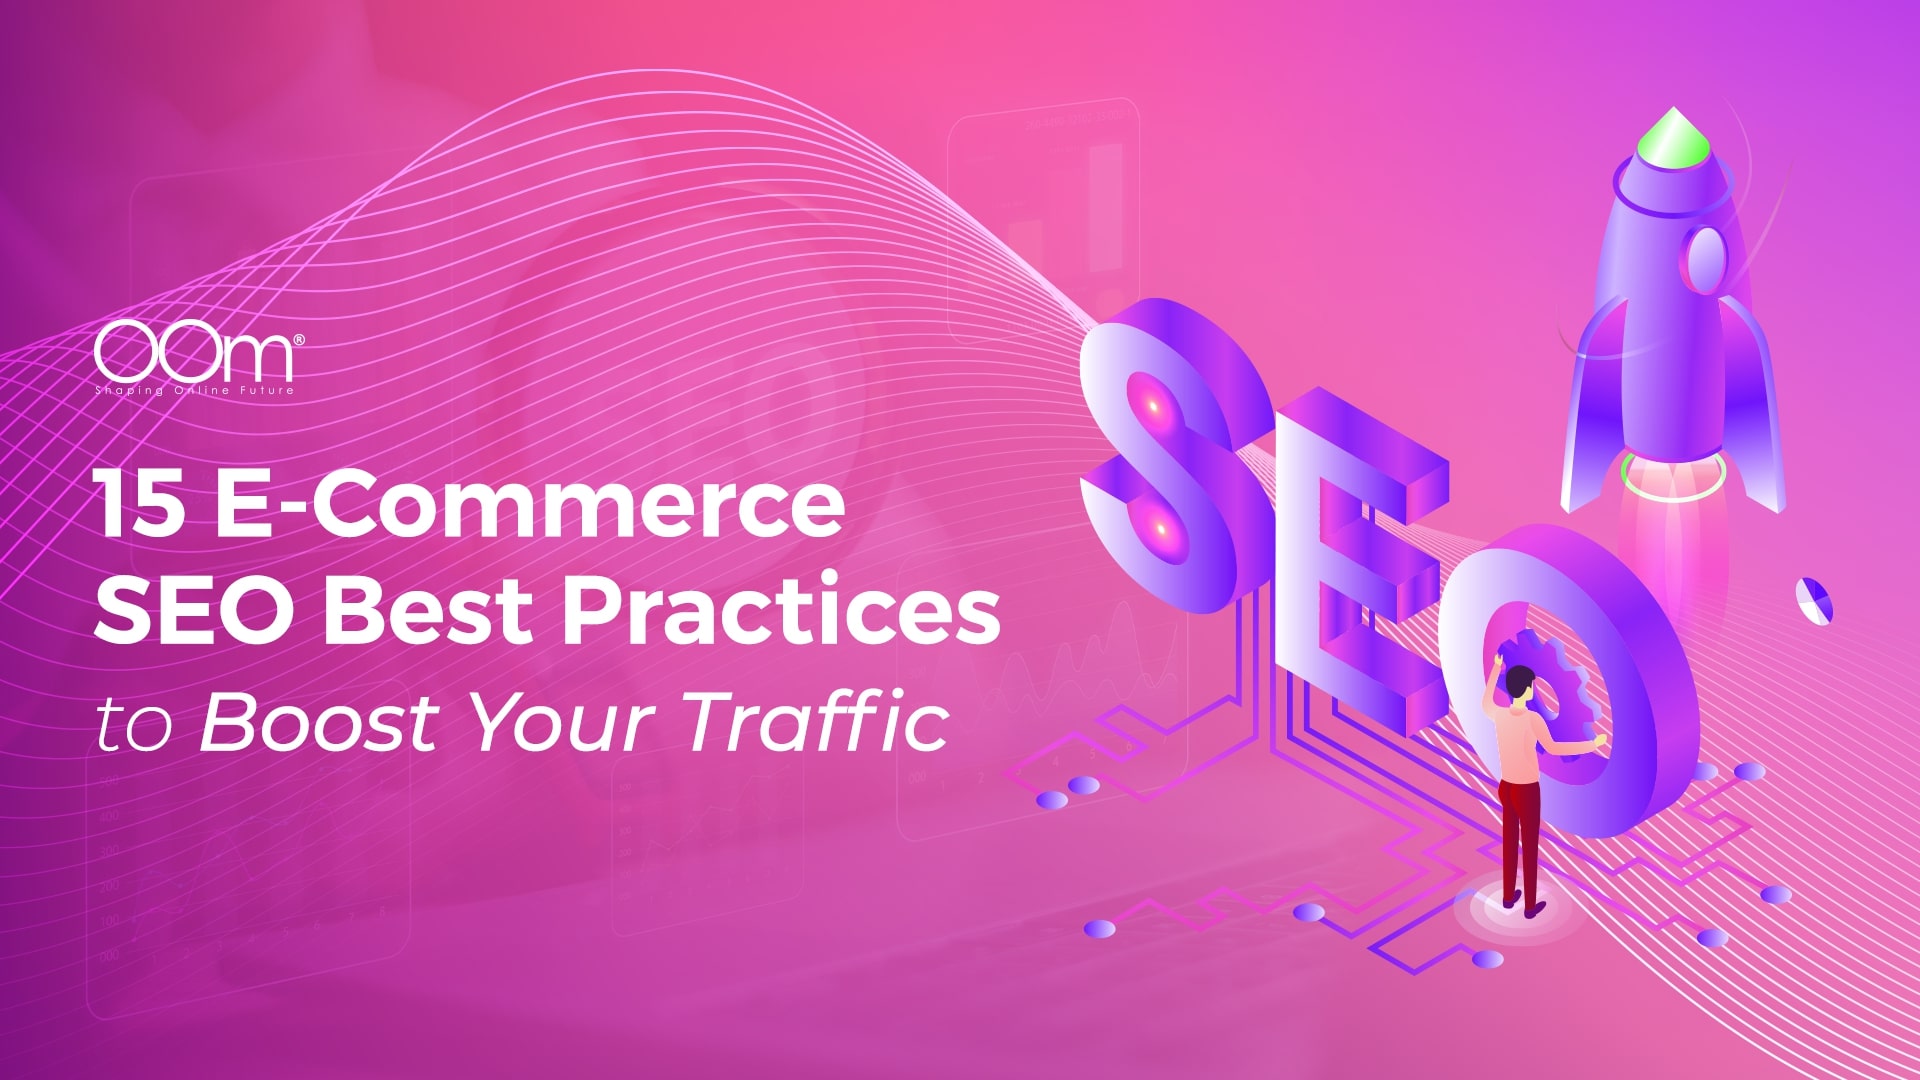 15 E-Commerce SEO Best Practices to Boost Your Traffic